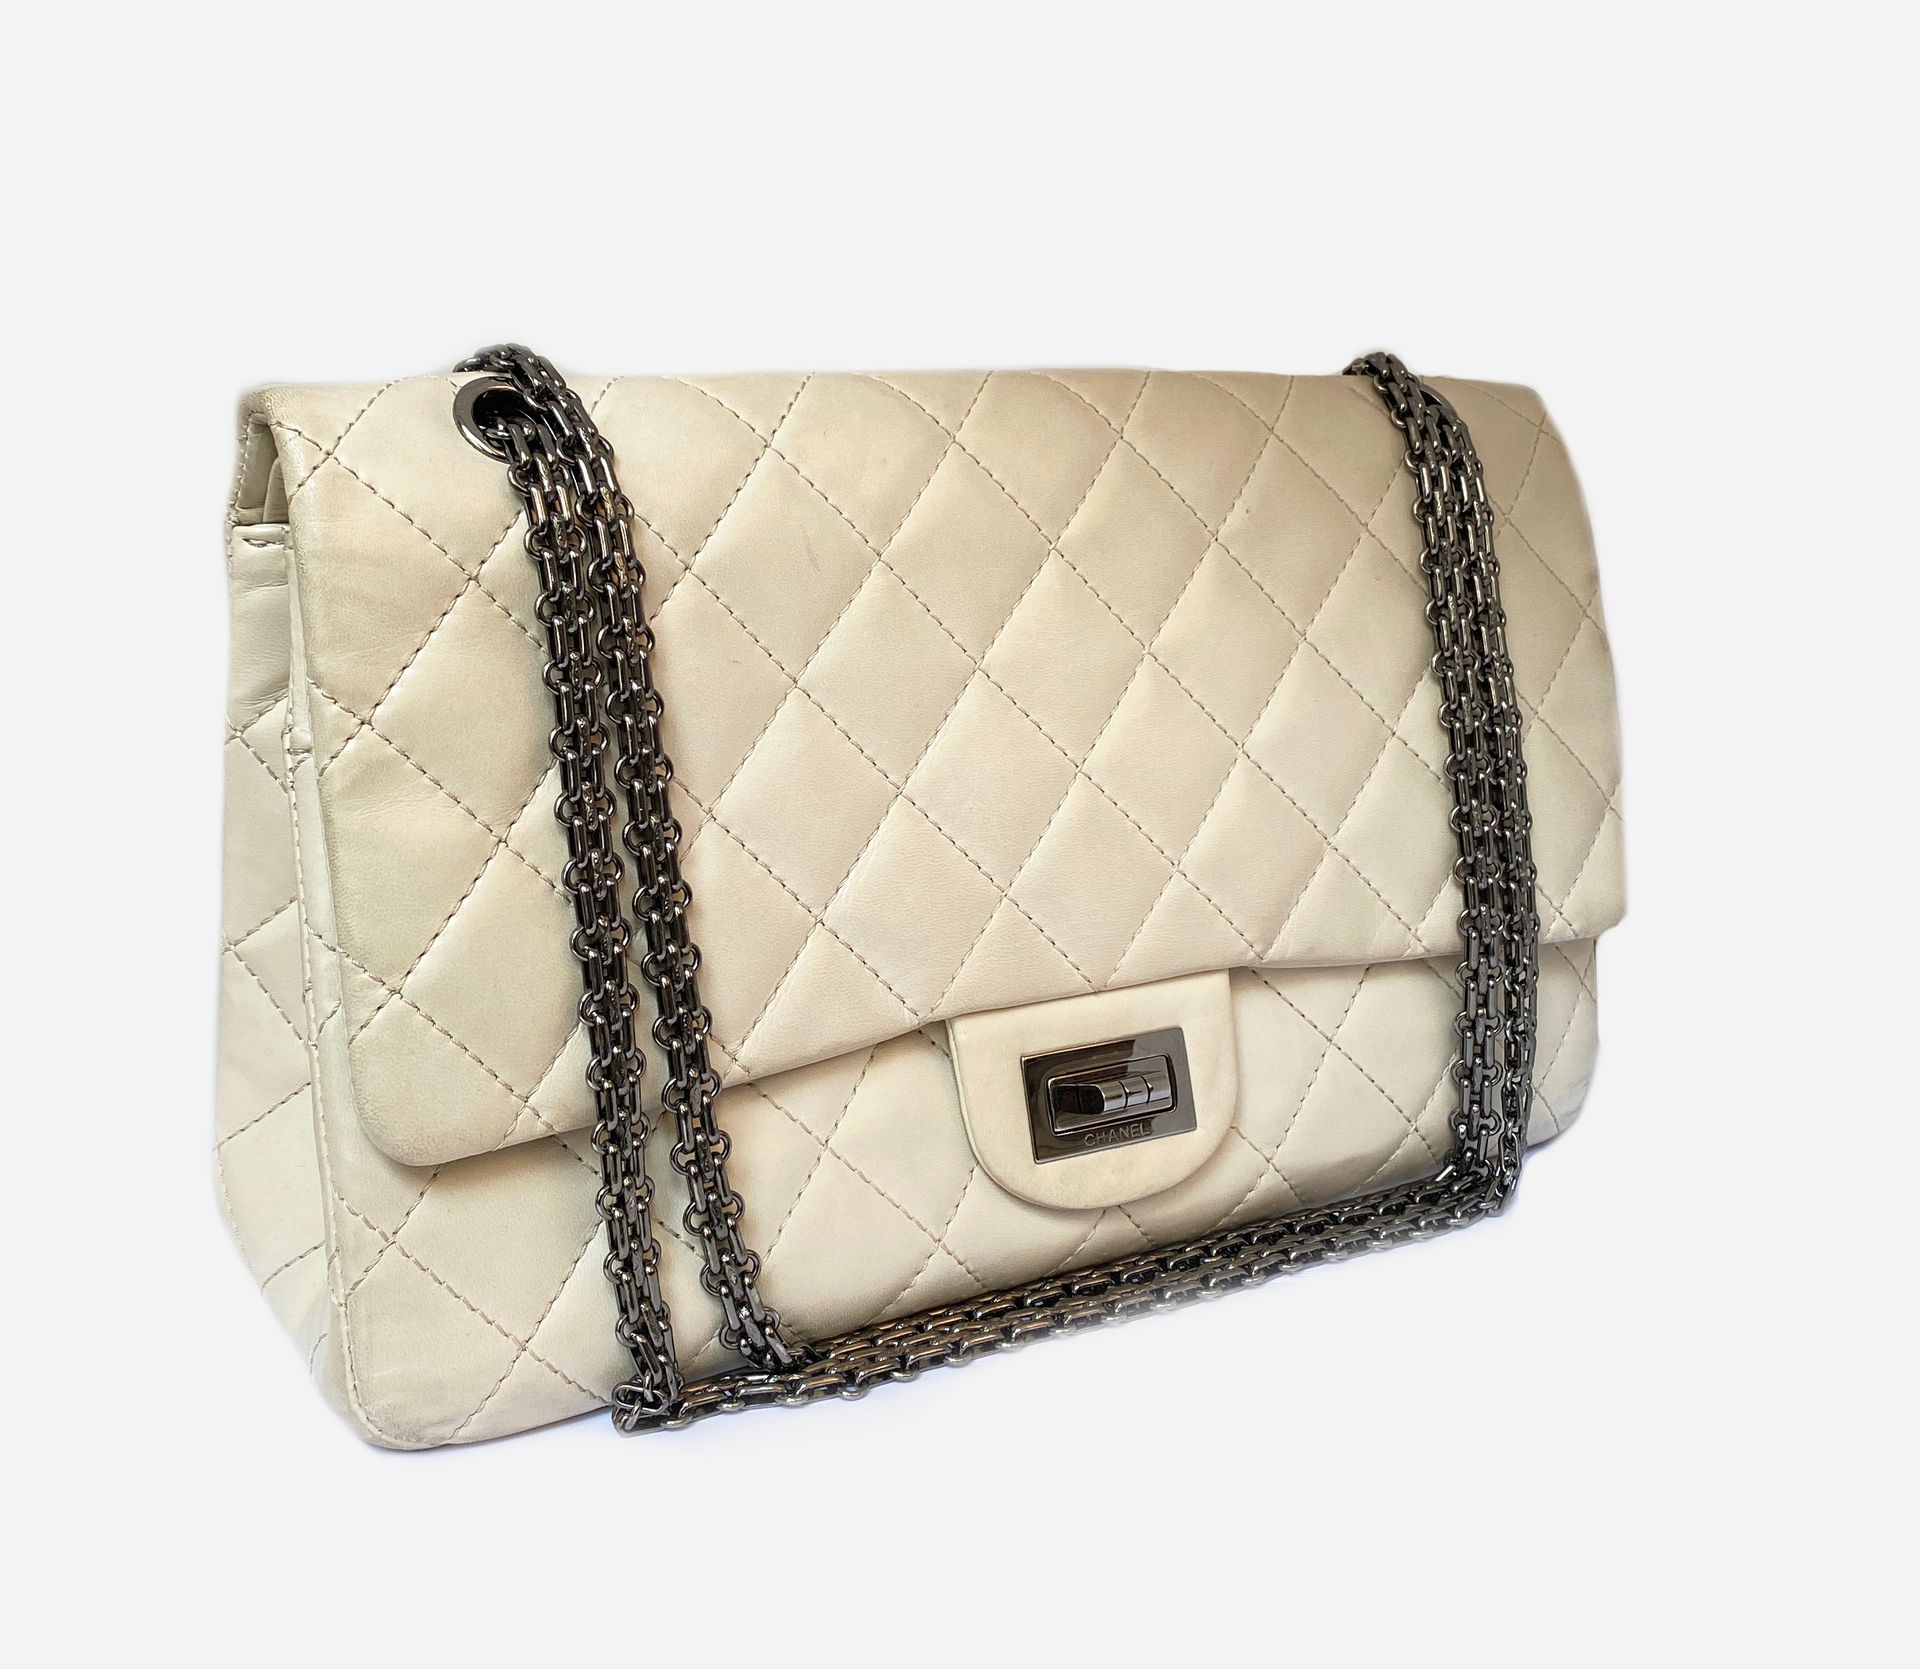 CHANEL. Bag  in ivory lambskin, ruthenium trim. Double flap closure,  Mademoiselle clasp, flat metal chain, sliding for carrying on the shoulder  or across the chest. 31 x 19 cm. Good condition,